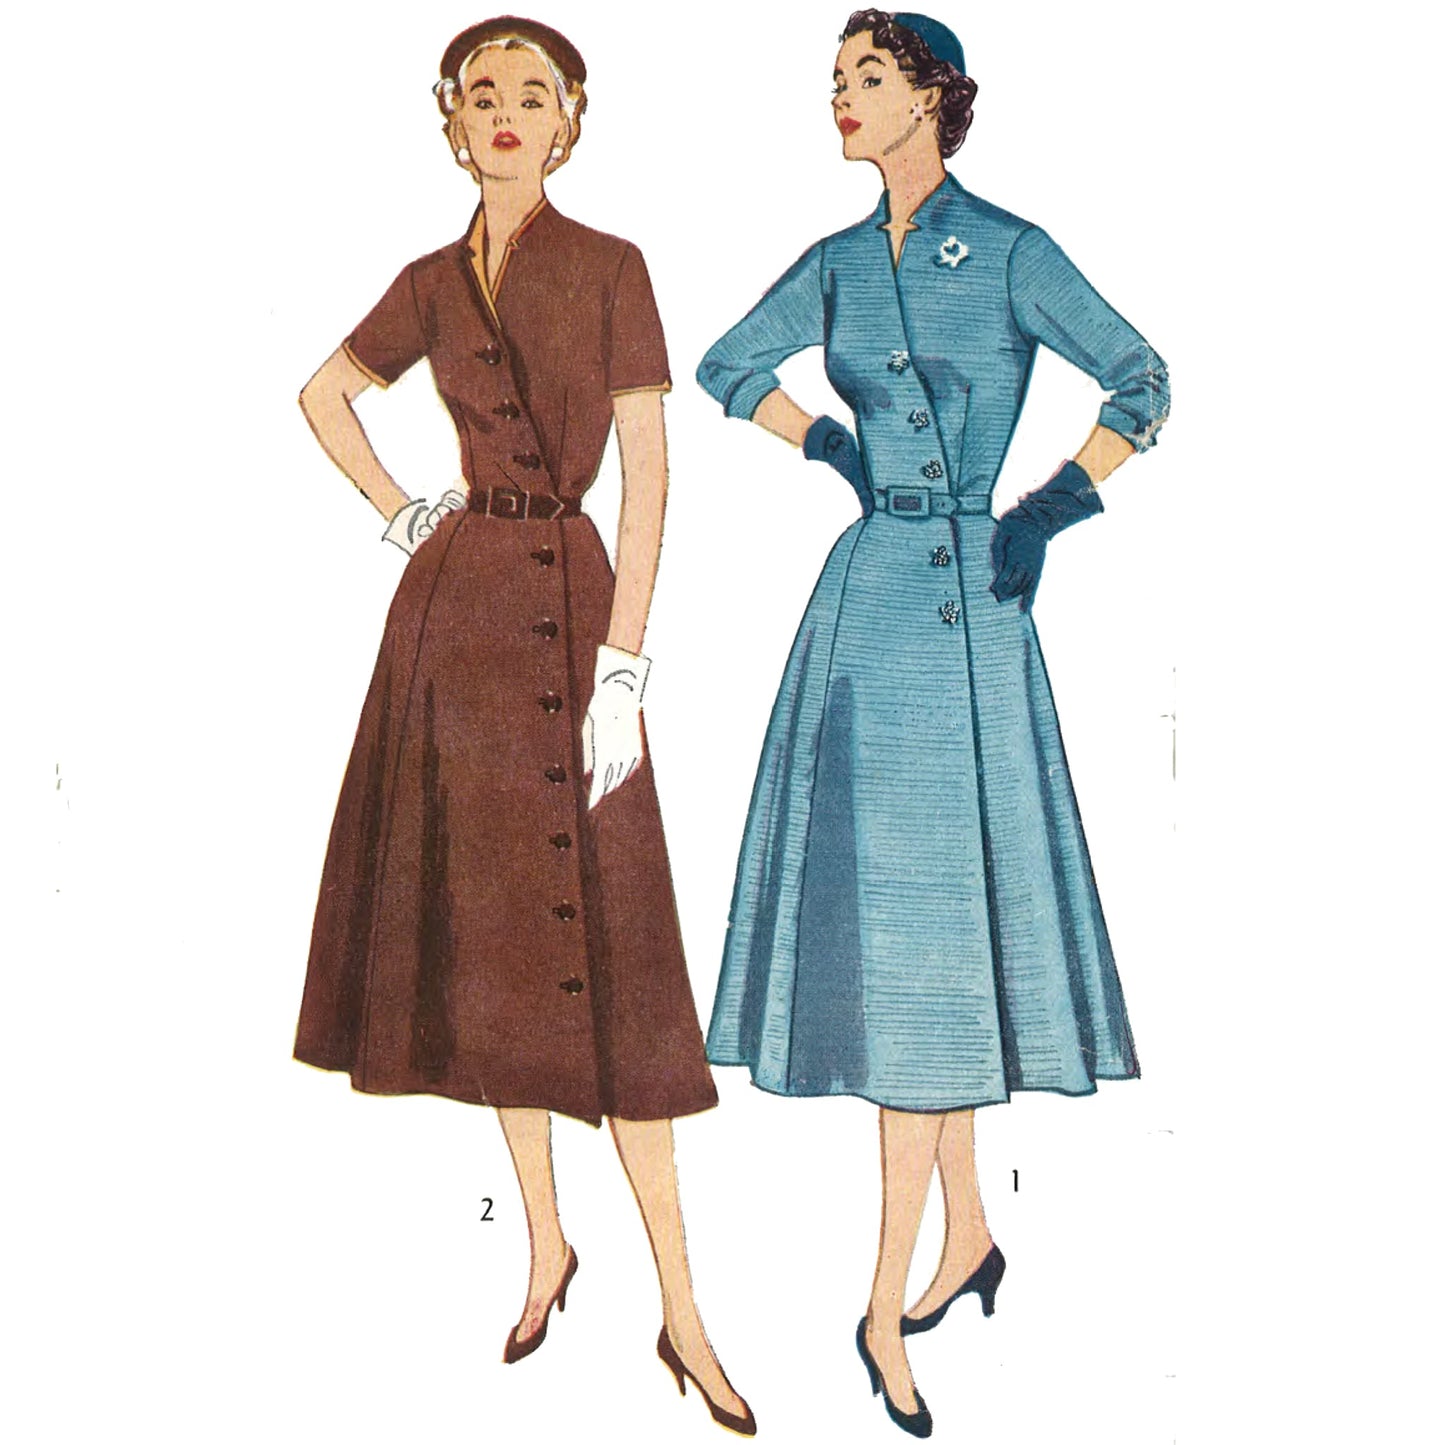 Two women wearing dresses. Left, dress in brown with short sleeves. Right, dress in blue with longer sleeves.